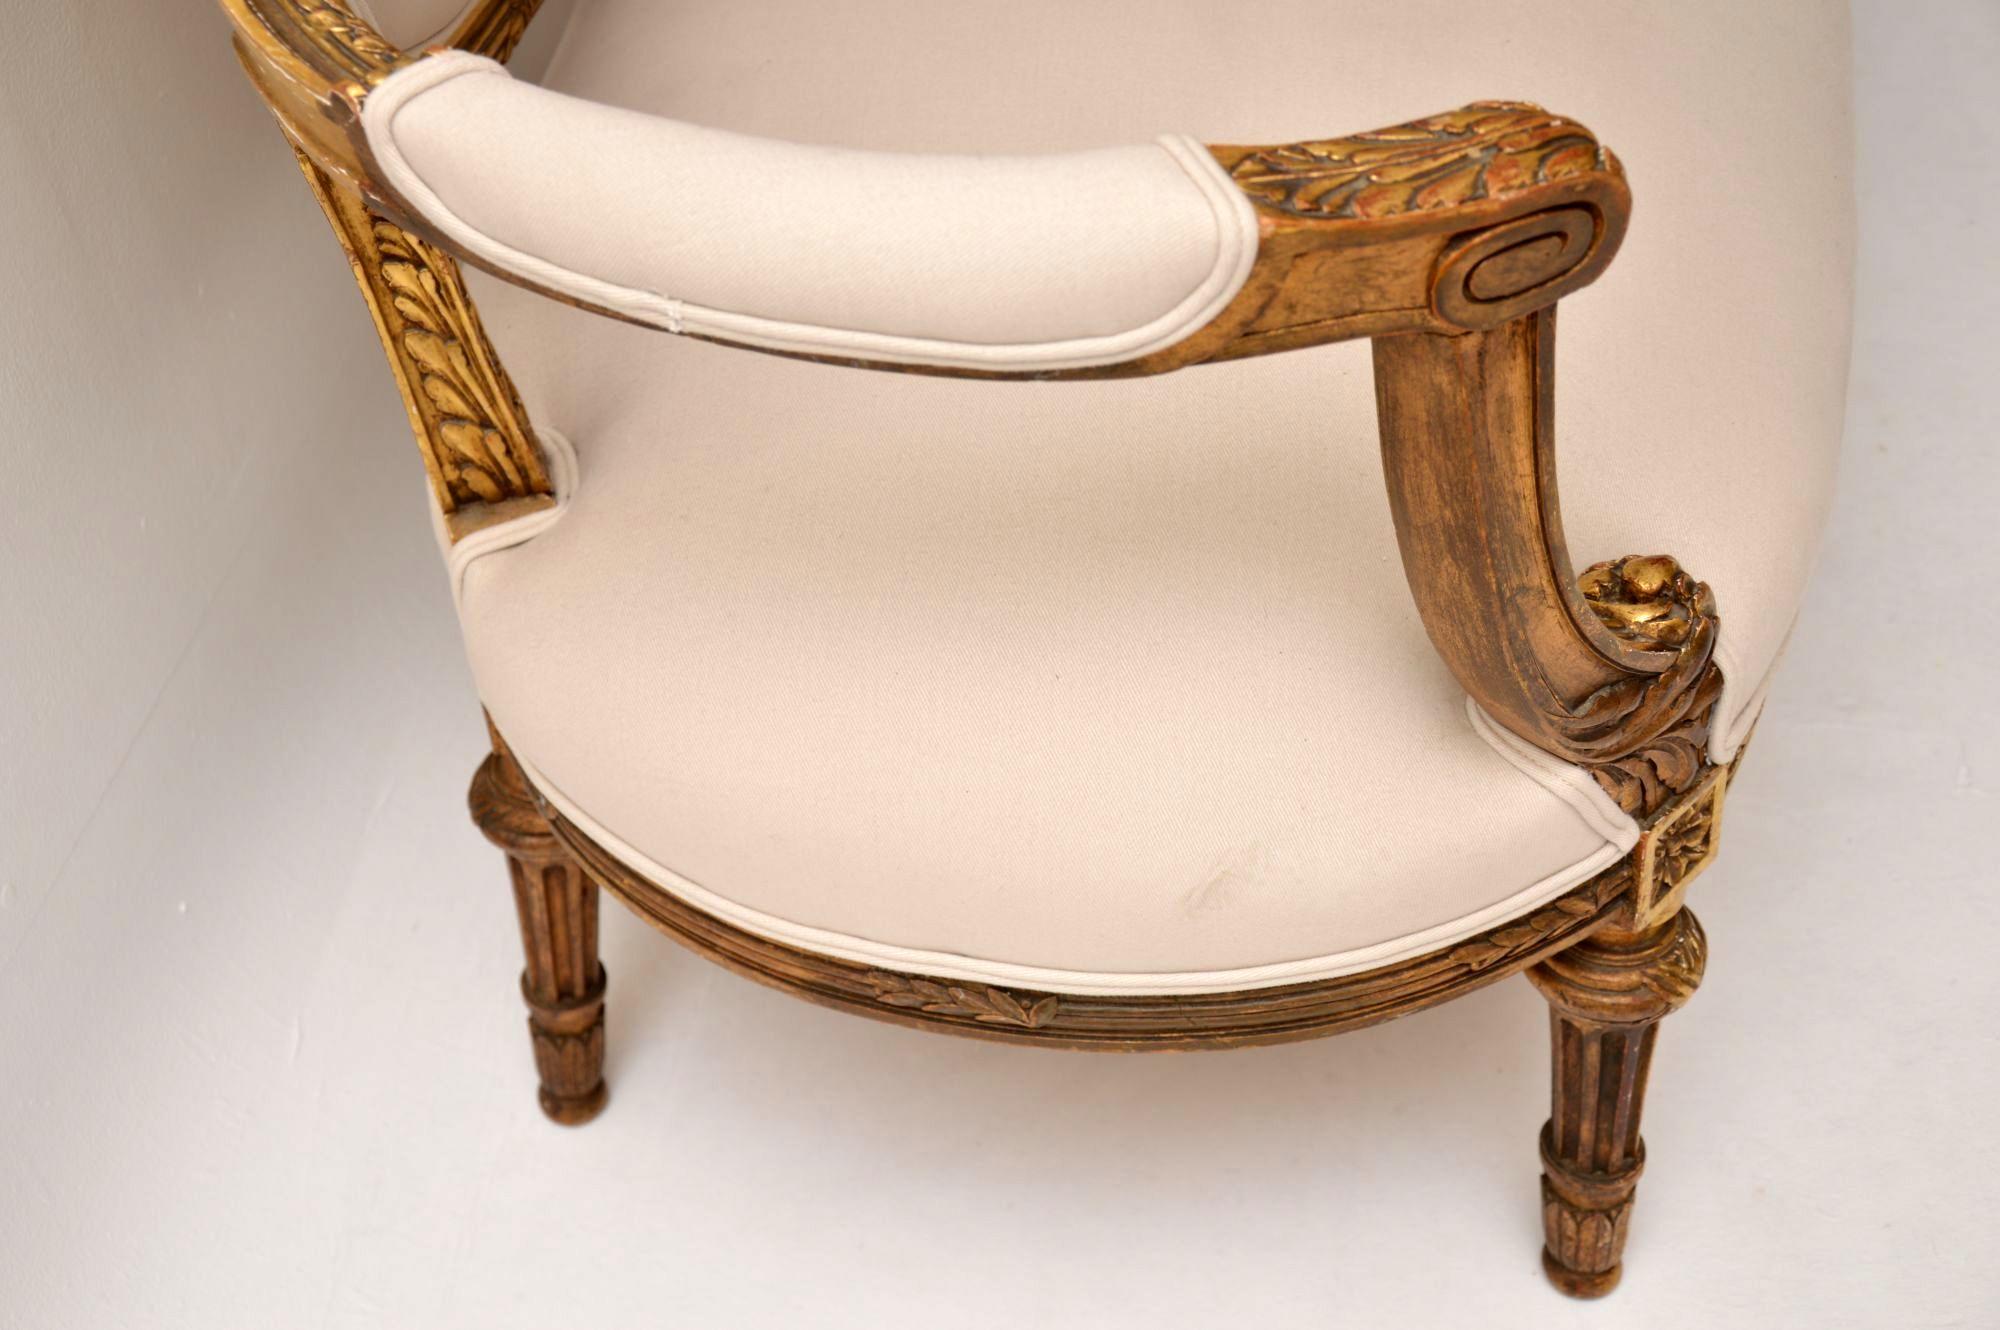 19th Century Antique French Giltwood Sofa